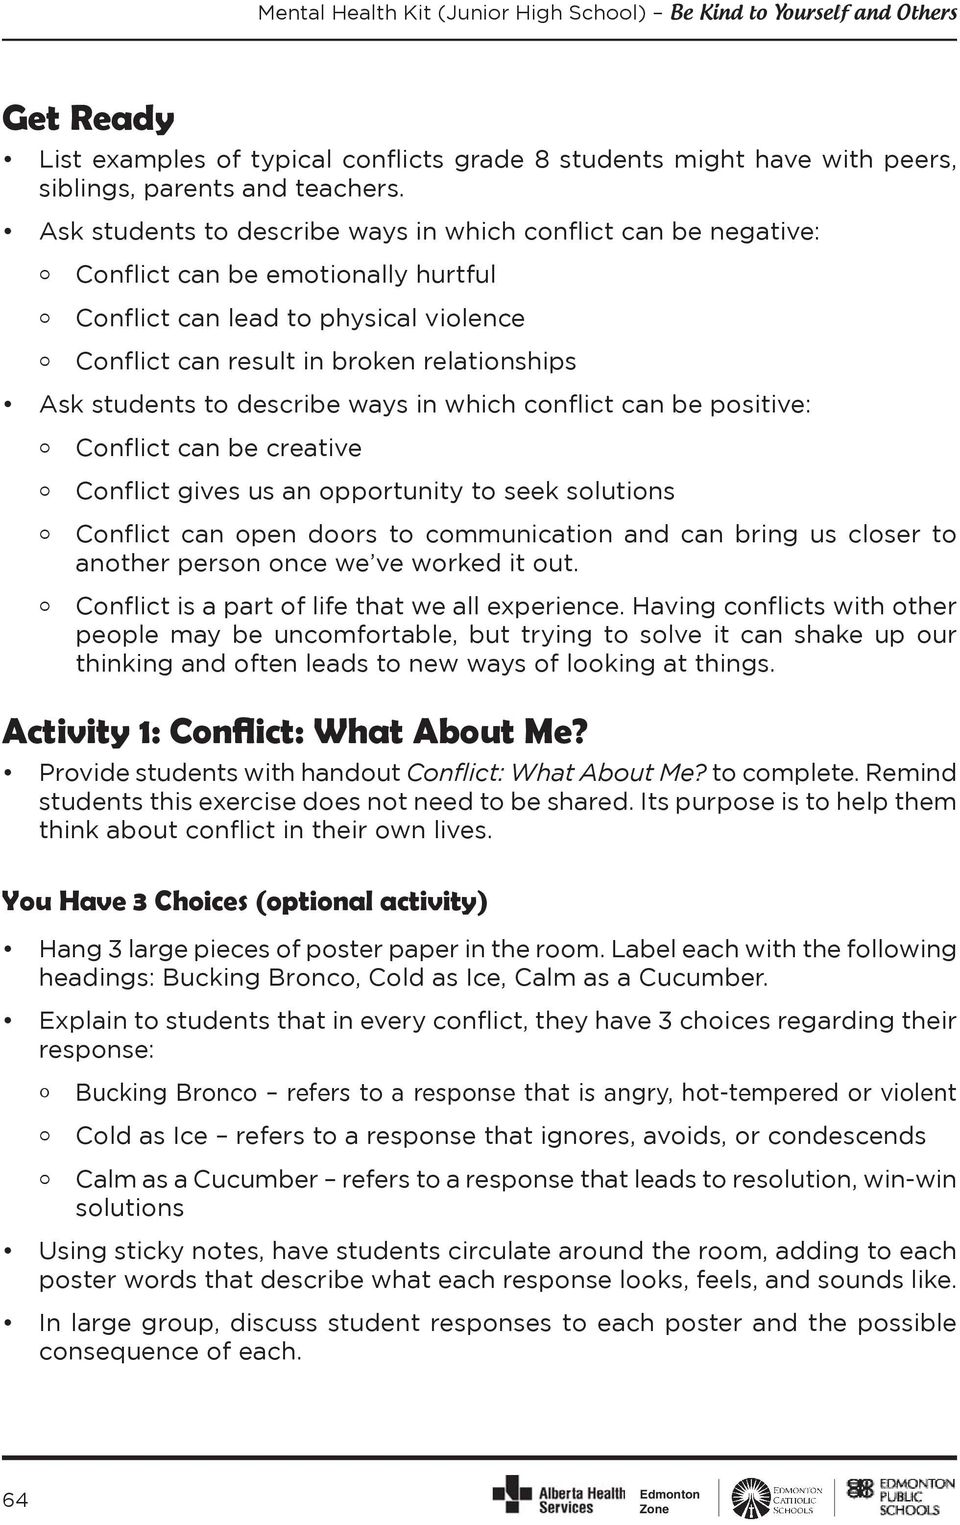 describe ways in which conflict can be positive: Conflict can be creative Conflict gives us an opportunity to seek solutions Conflict can open doors to communication and can bring us closer to